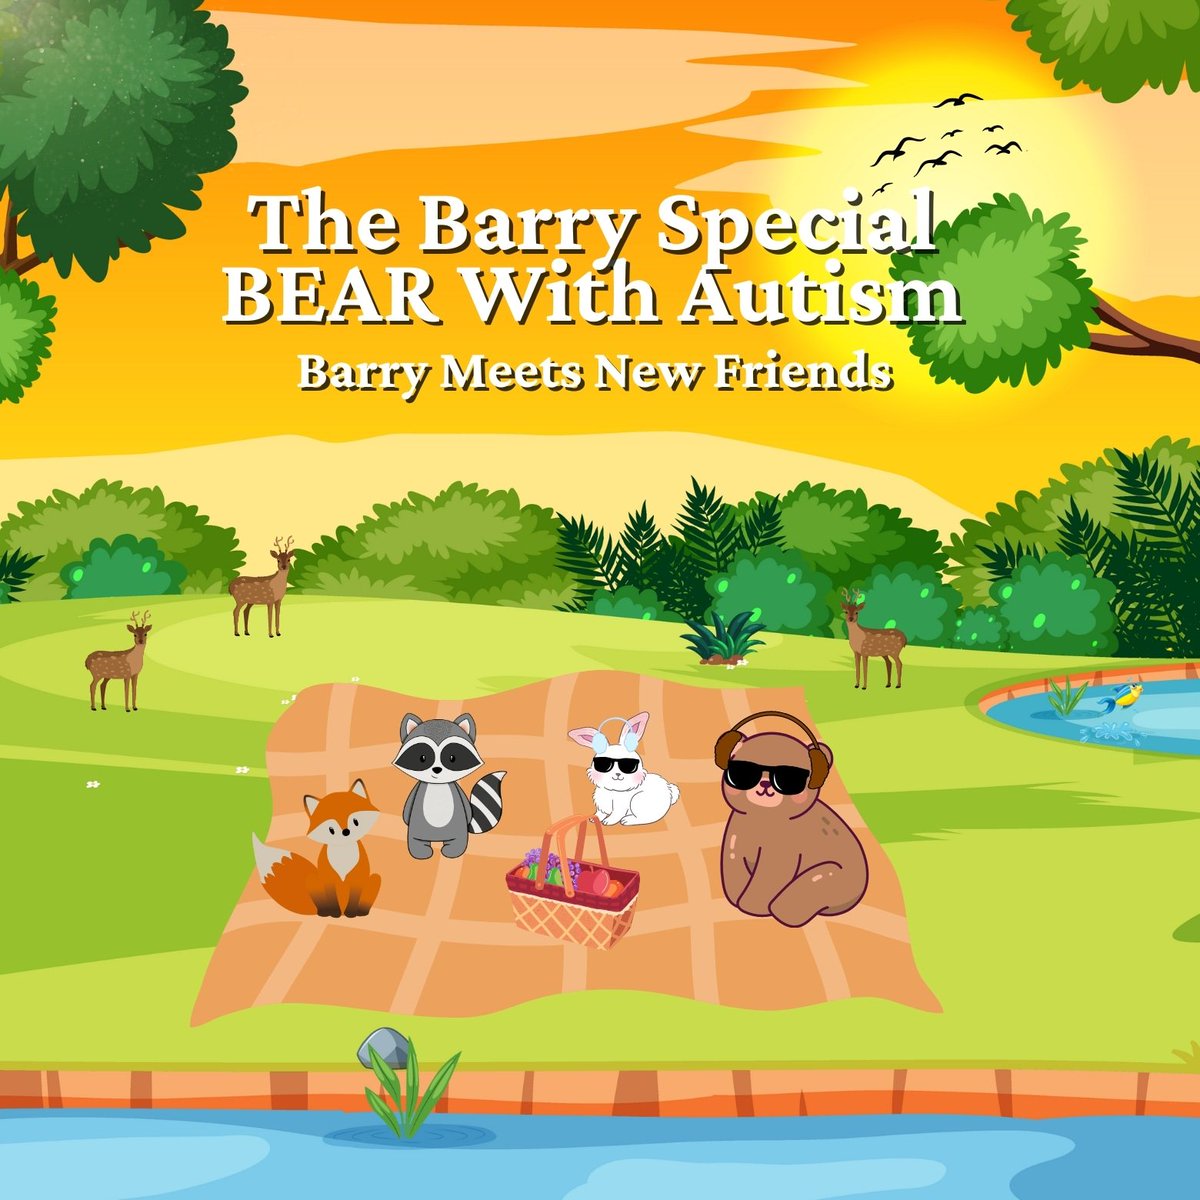 Read The Barry Special Bear with Autism for free on Inkitt, 100% Free inkitt.com/stories/advent… #Twitterauthors #childrenbook #childrenbooks #kidbooks #freeebooks #freechildrenbooks #trendingbooks #trendingbook #specialneedsbook #twitterreaders #Specialneeds